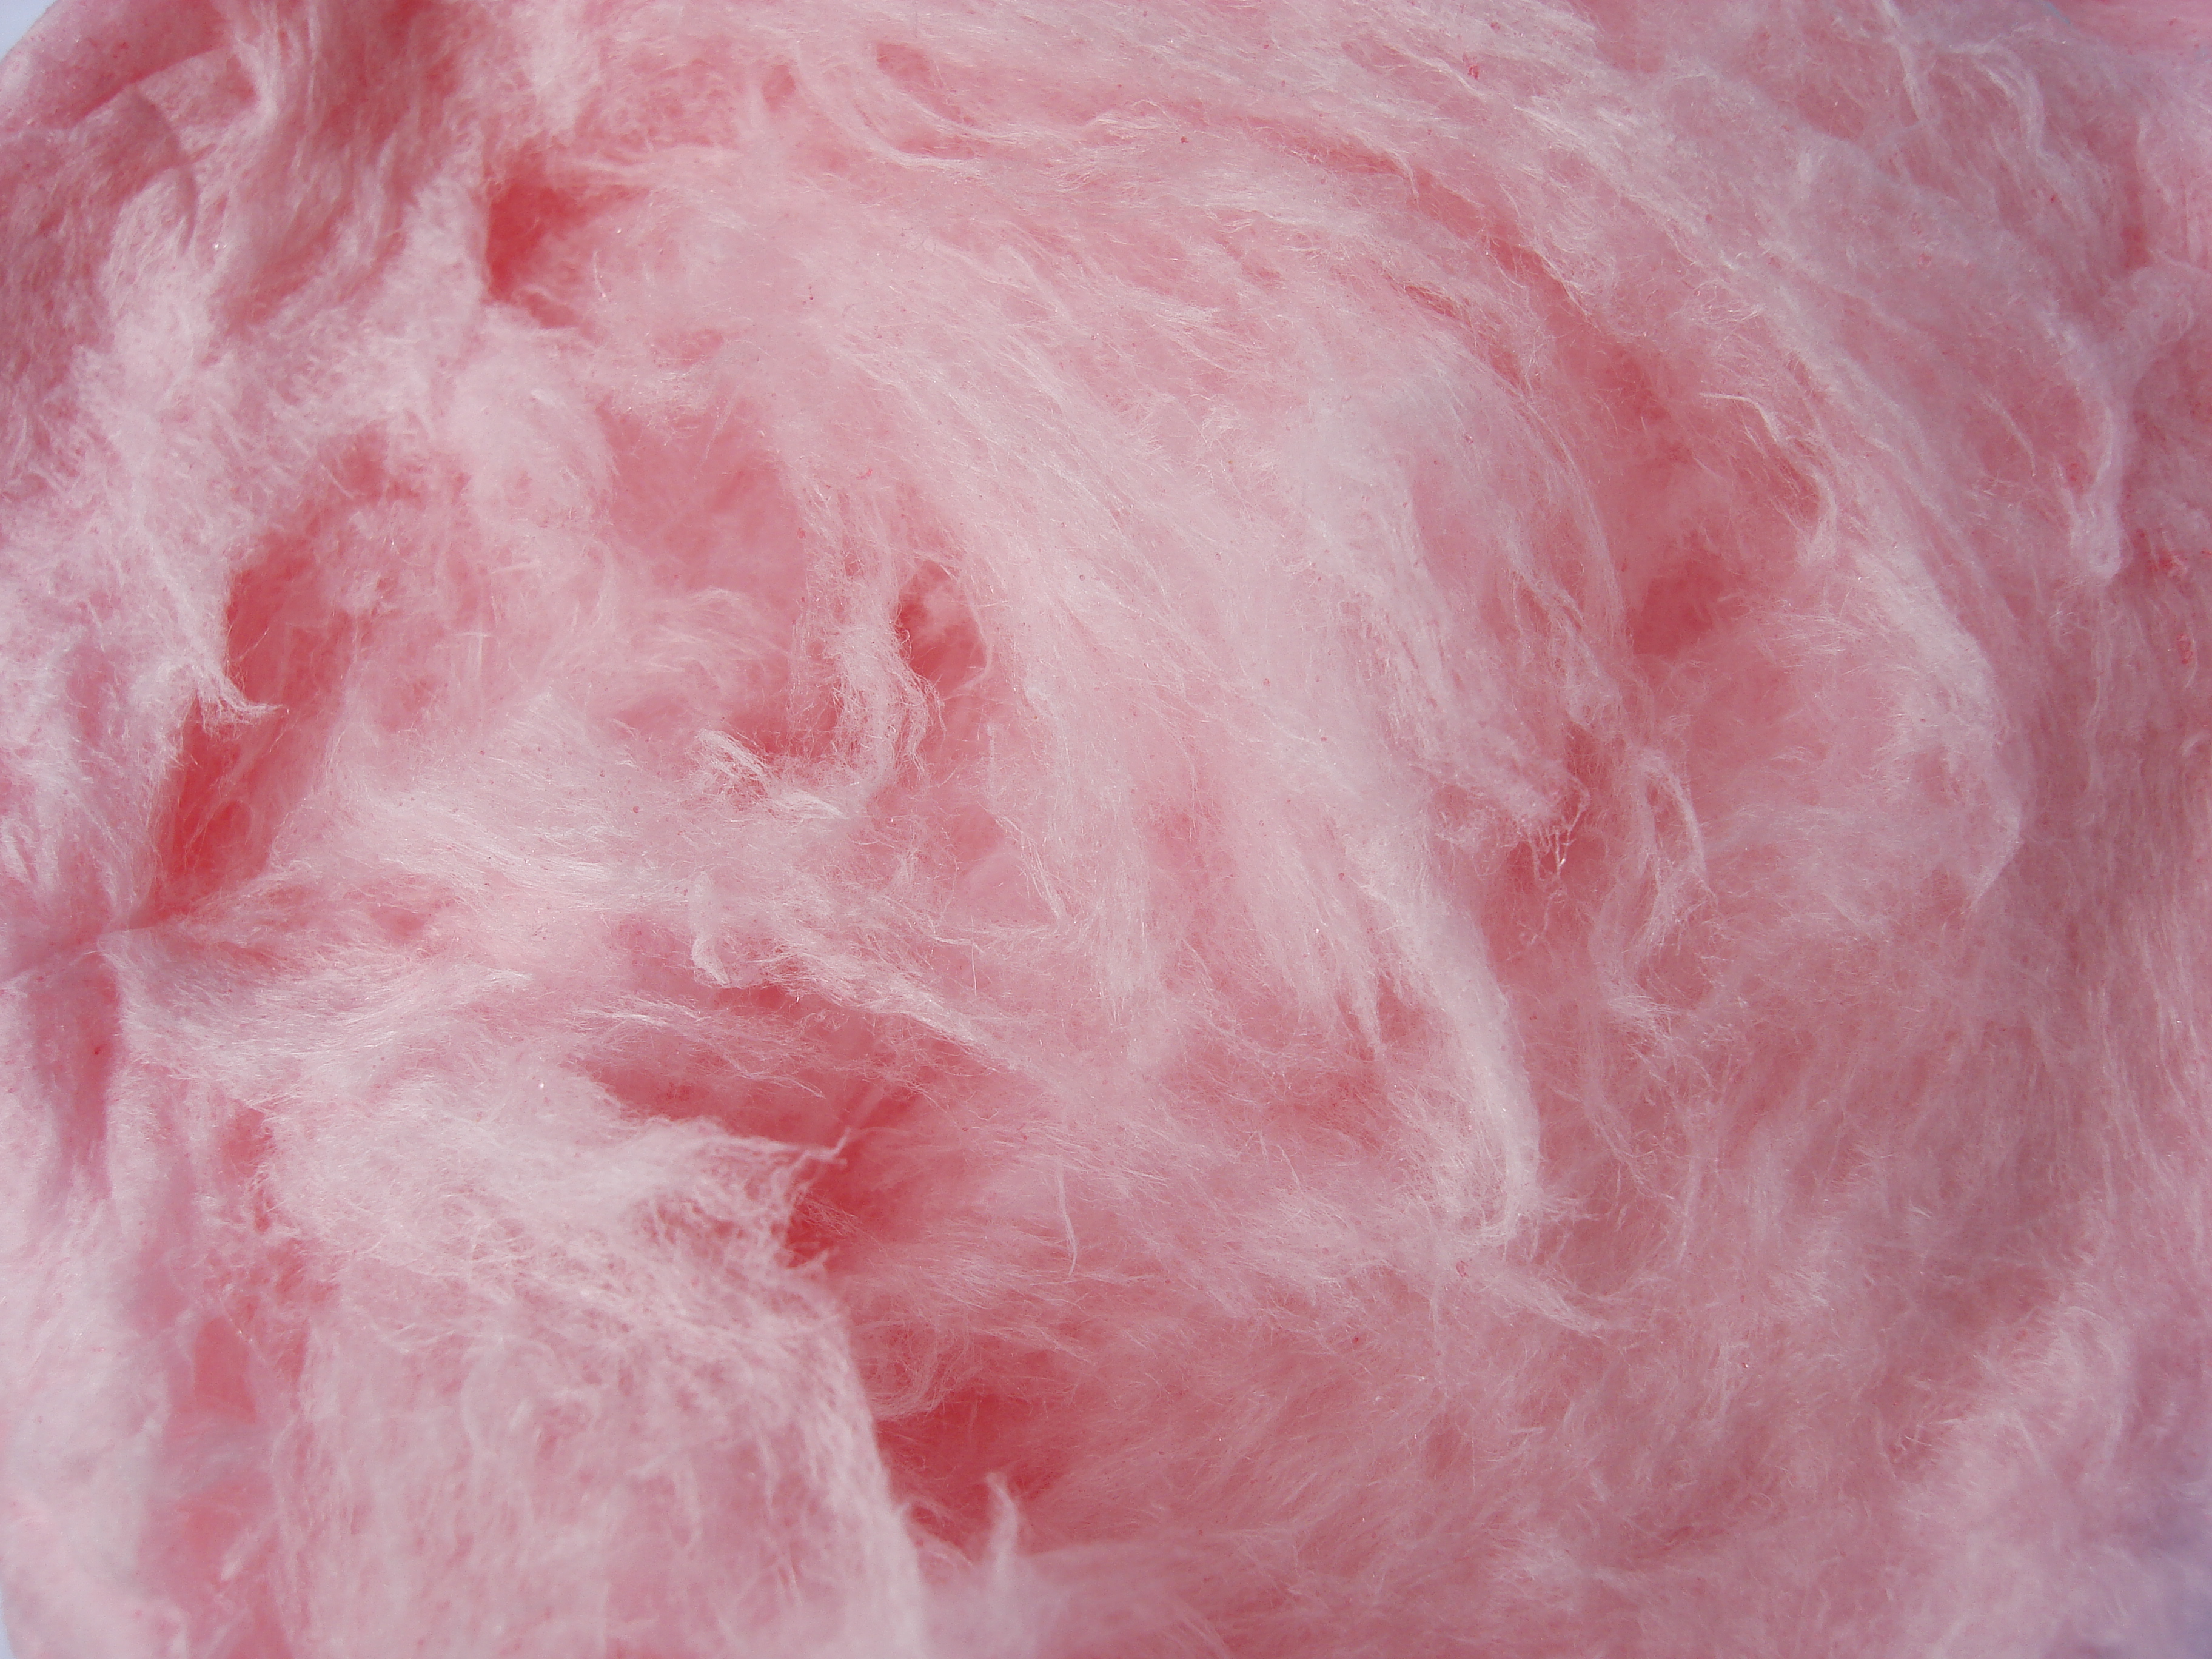 Food Cotton Candy 3648x2736